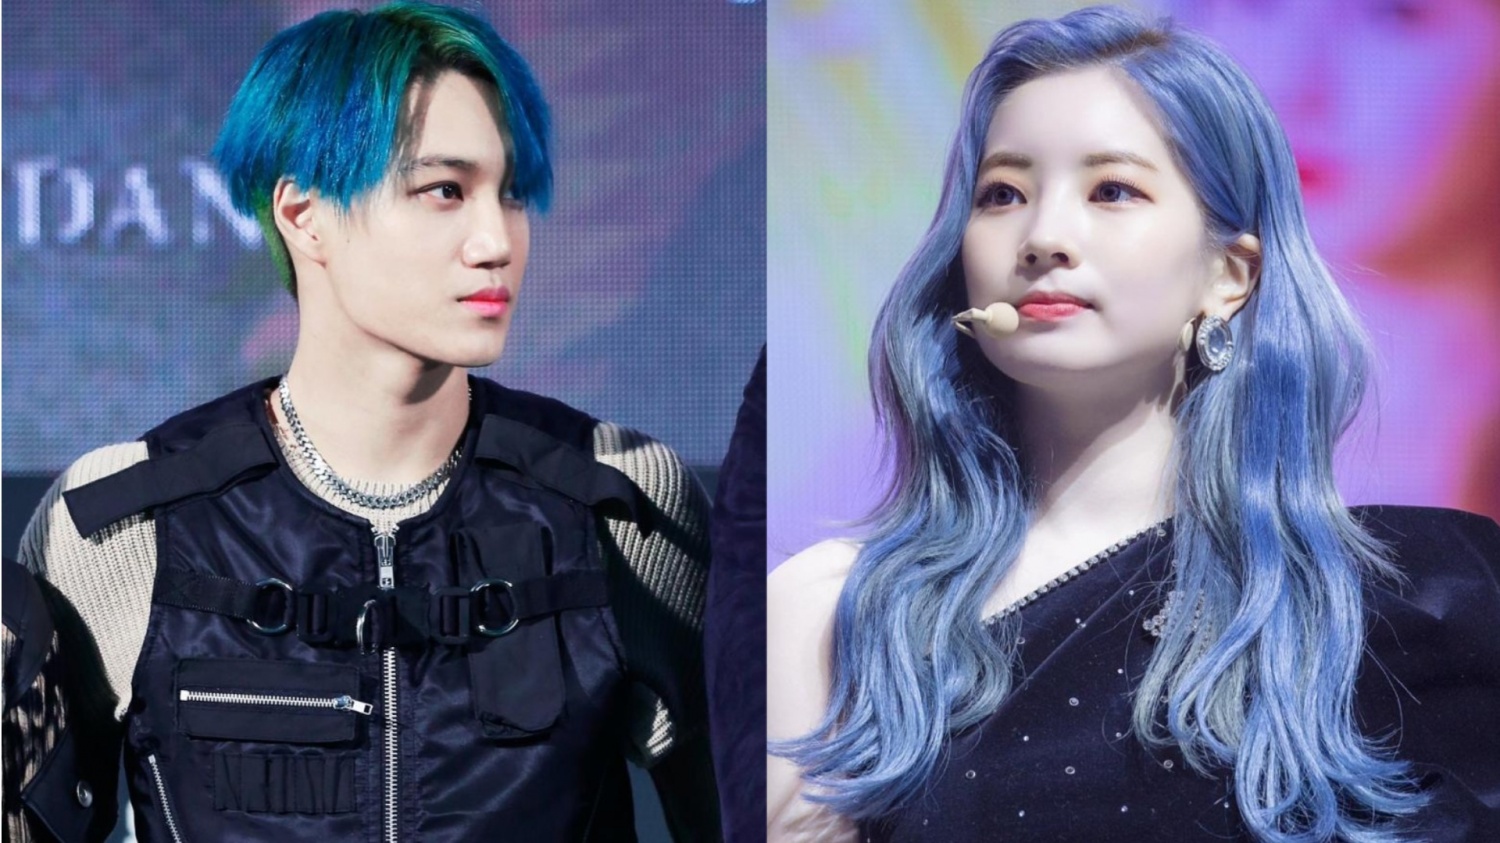 Exo Kai And Twice Dahyun Are Not Dating Spazzer Who Made The Rumor Takes Down Post Kpopstarz